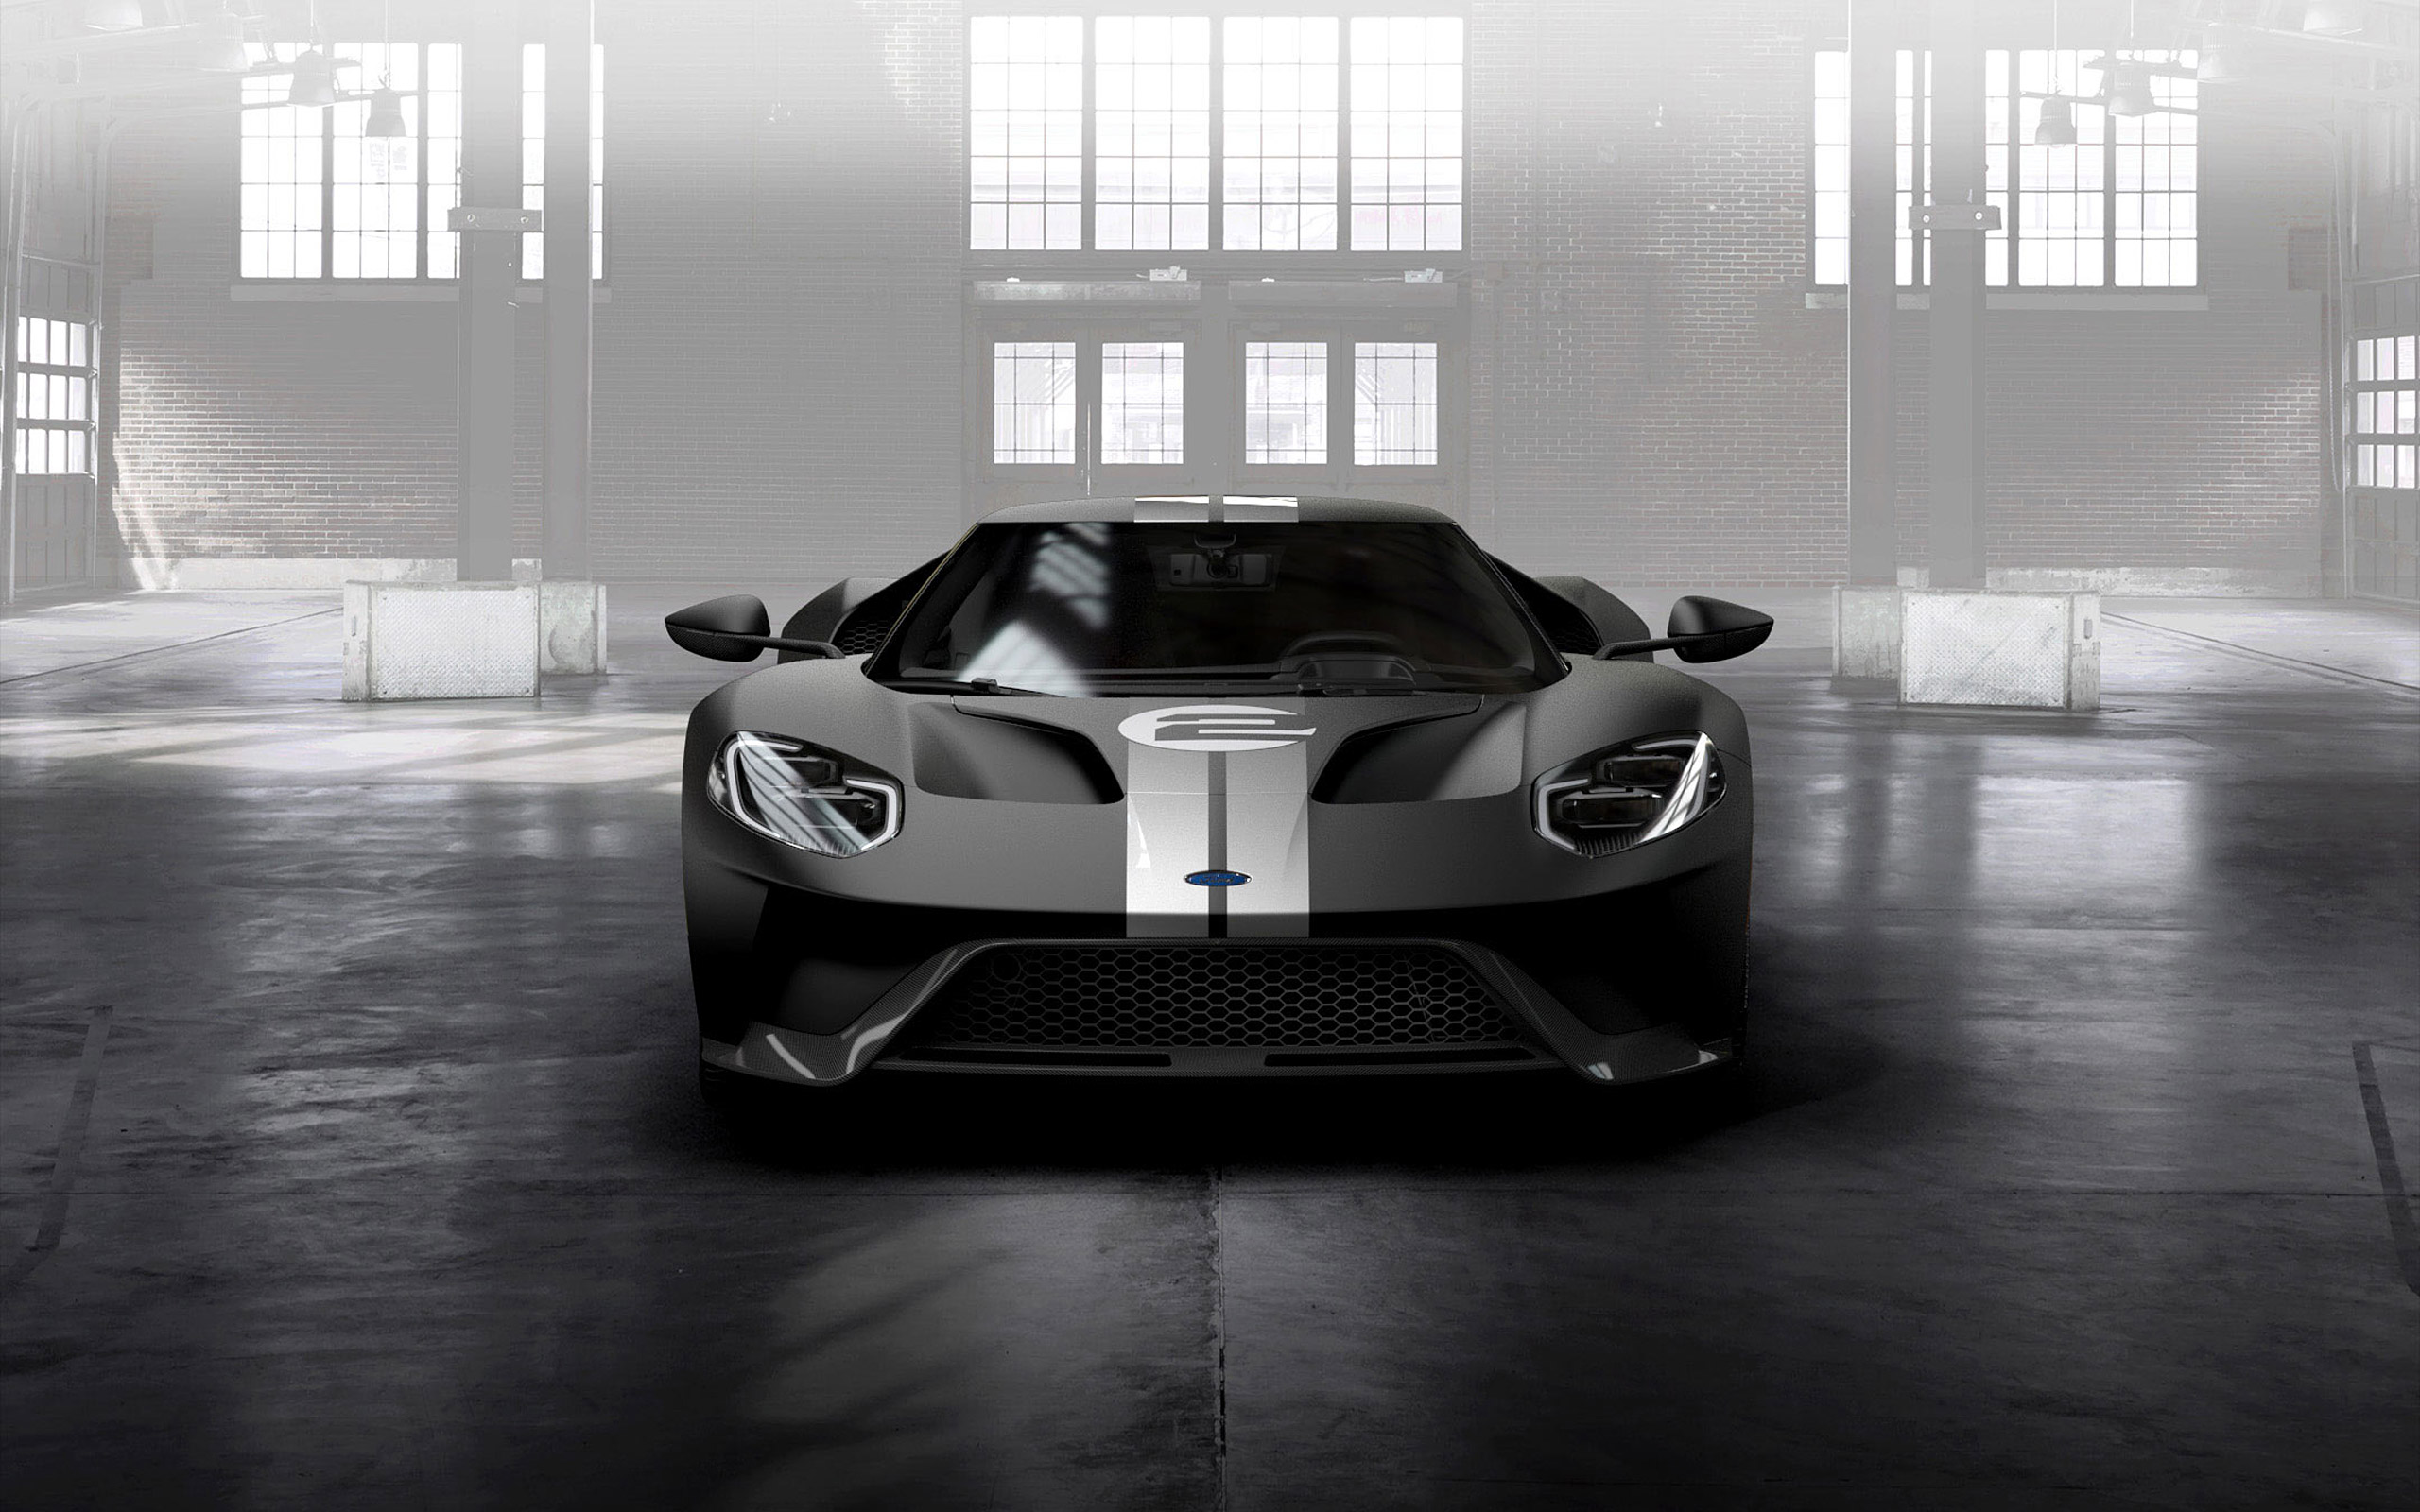  2017 Ford GT 66 Heritage Edition Wallpaper.